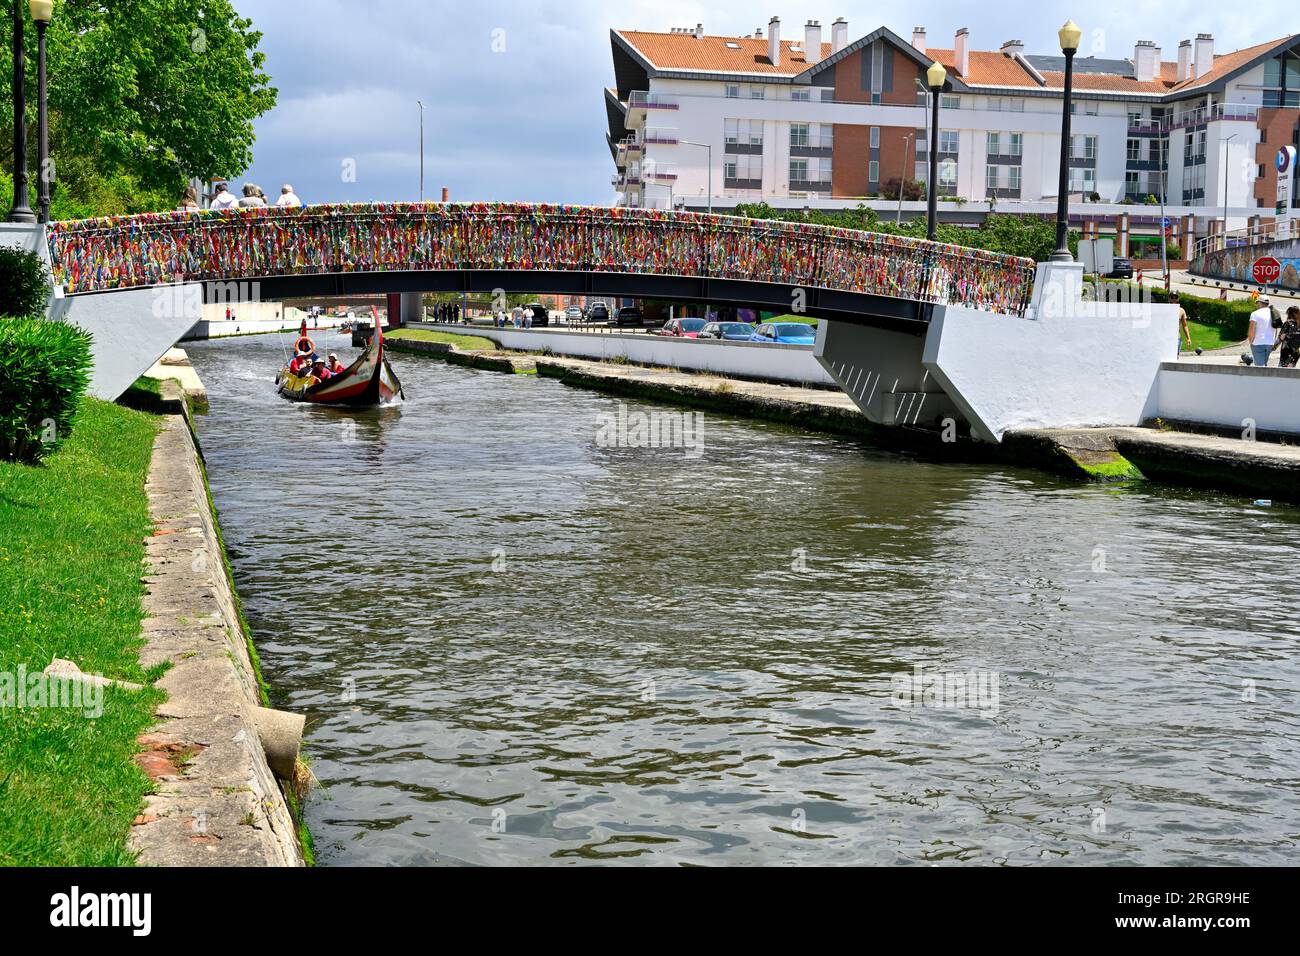 Bridge over canal covered in keepsake signed tags with traditional Moliceiro boat with tourists. Aveiro, Portugal Stock Photo